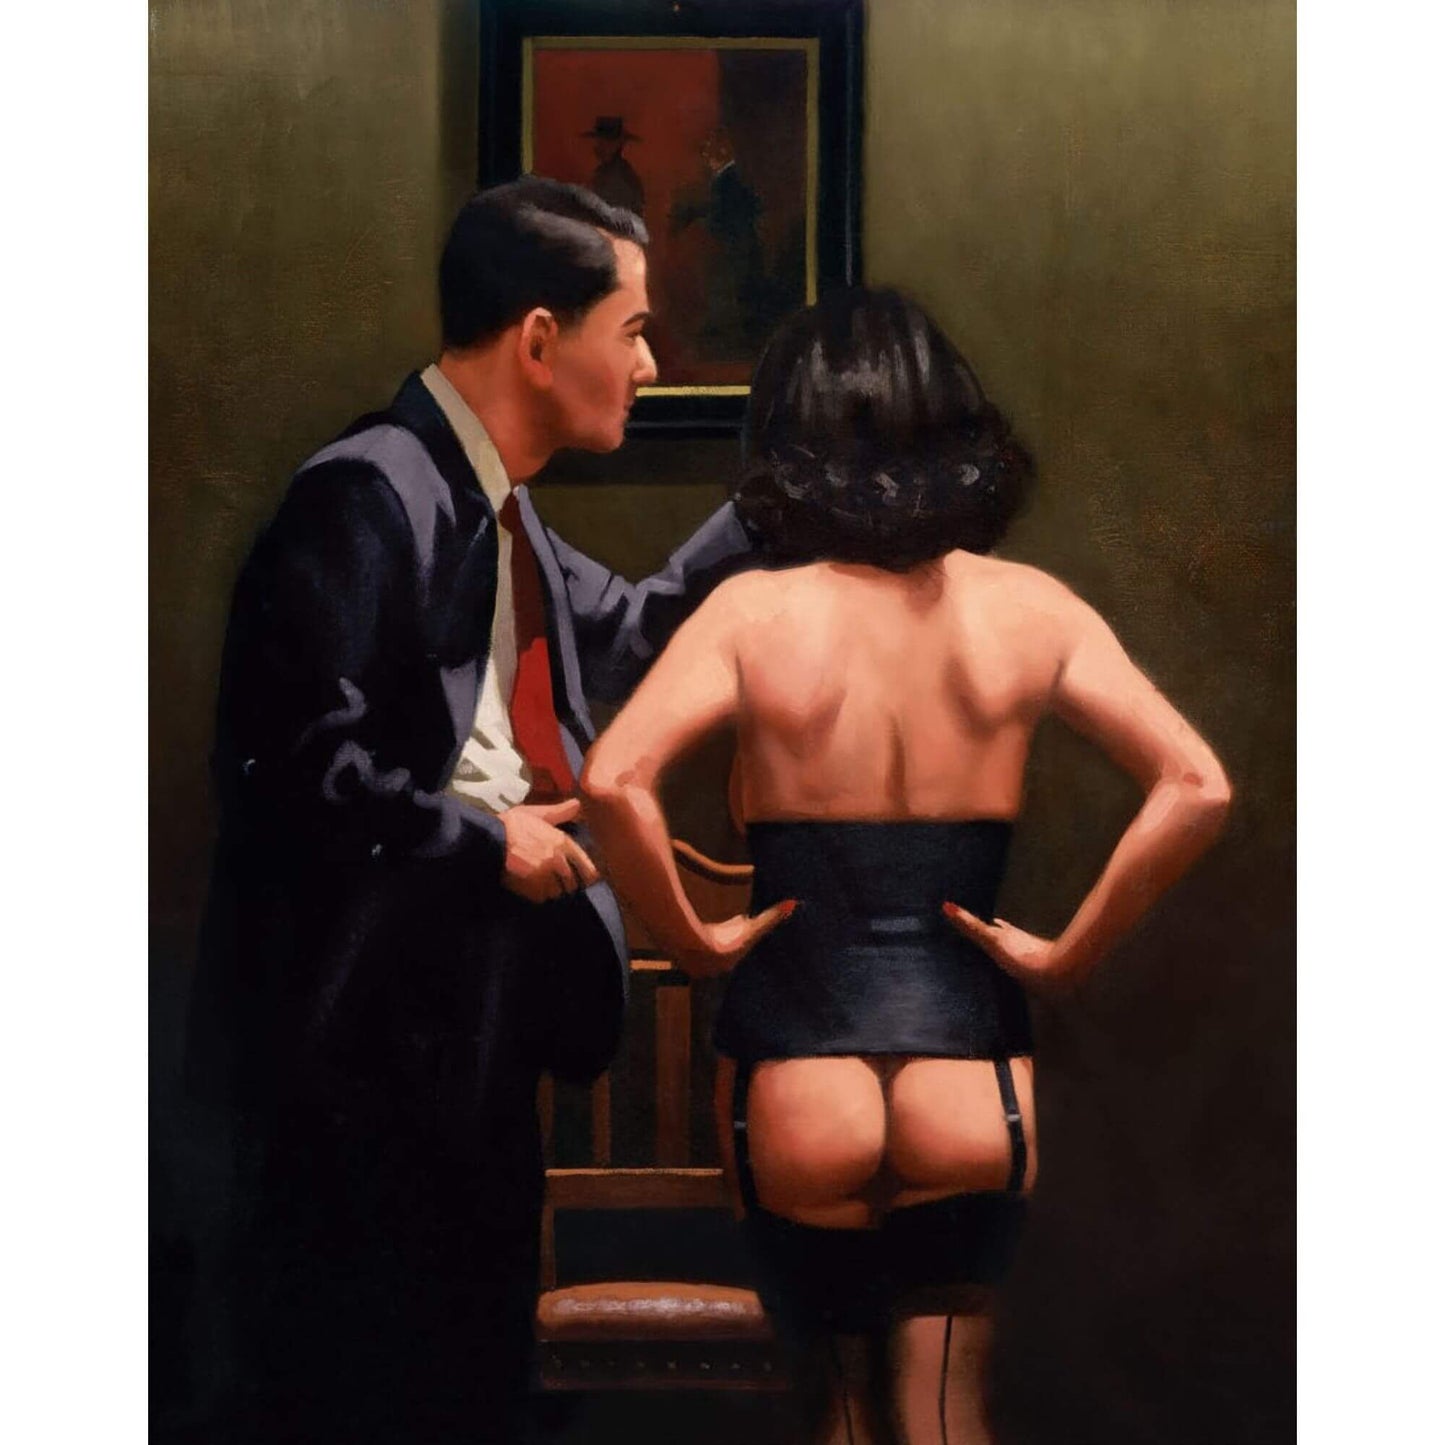 Evening of Ritual by Jack Vettriano